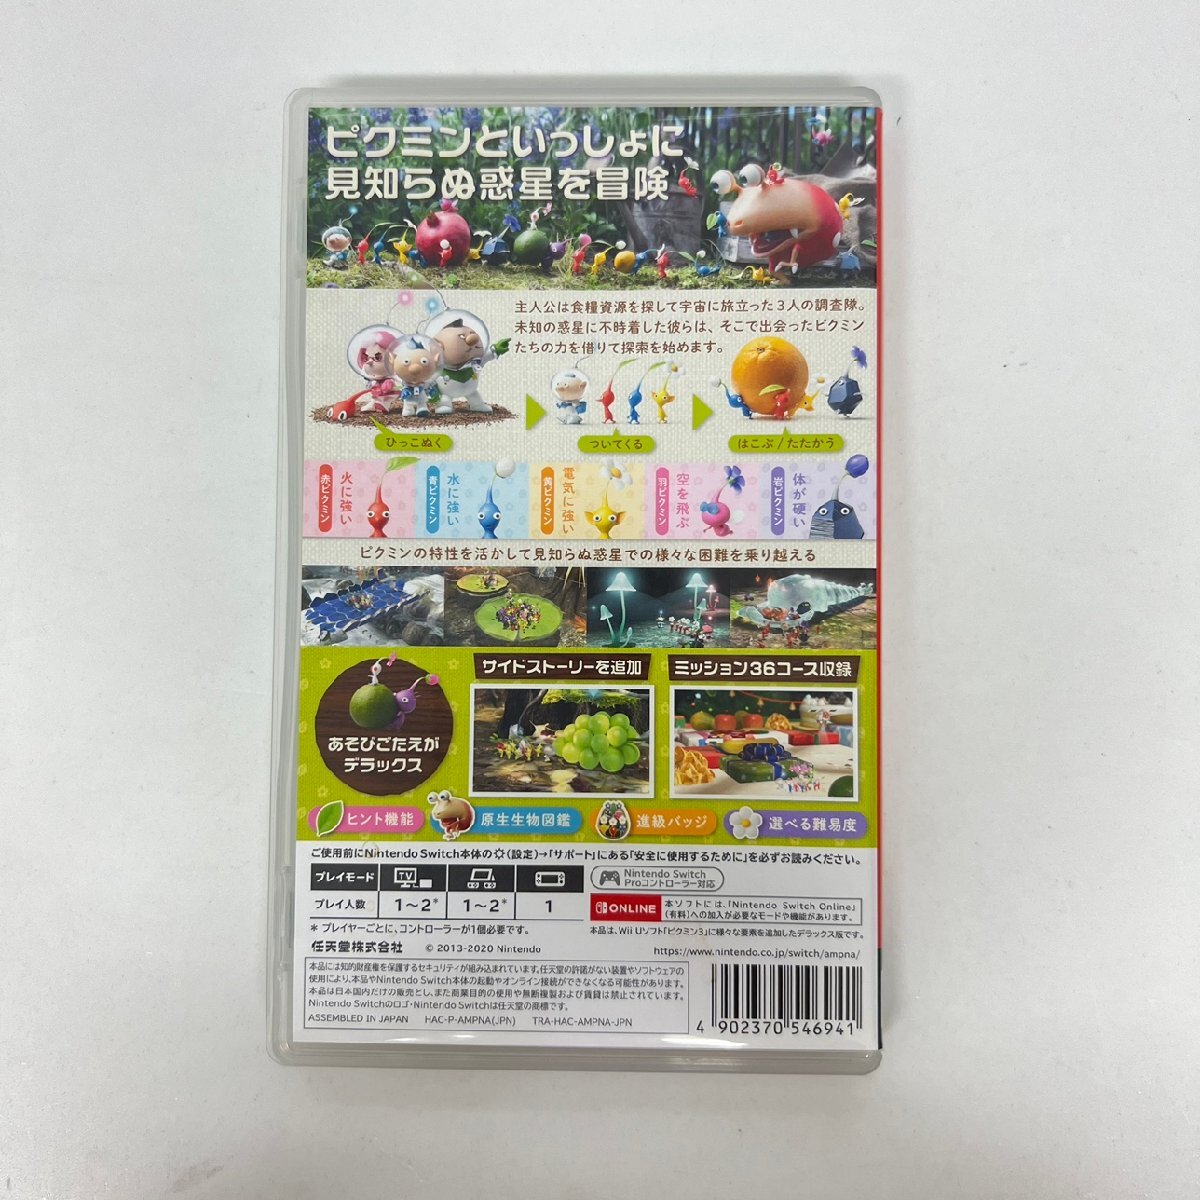 [86] Nintendo Switch Nintendo switch soft pikmin3 Deluxe operation not yet verification goods used 